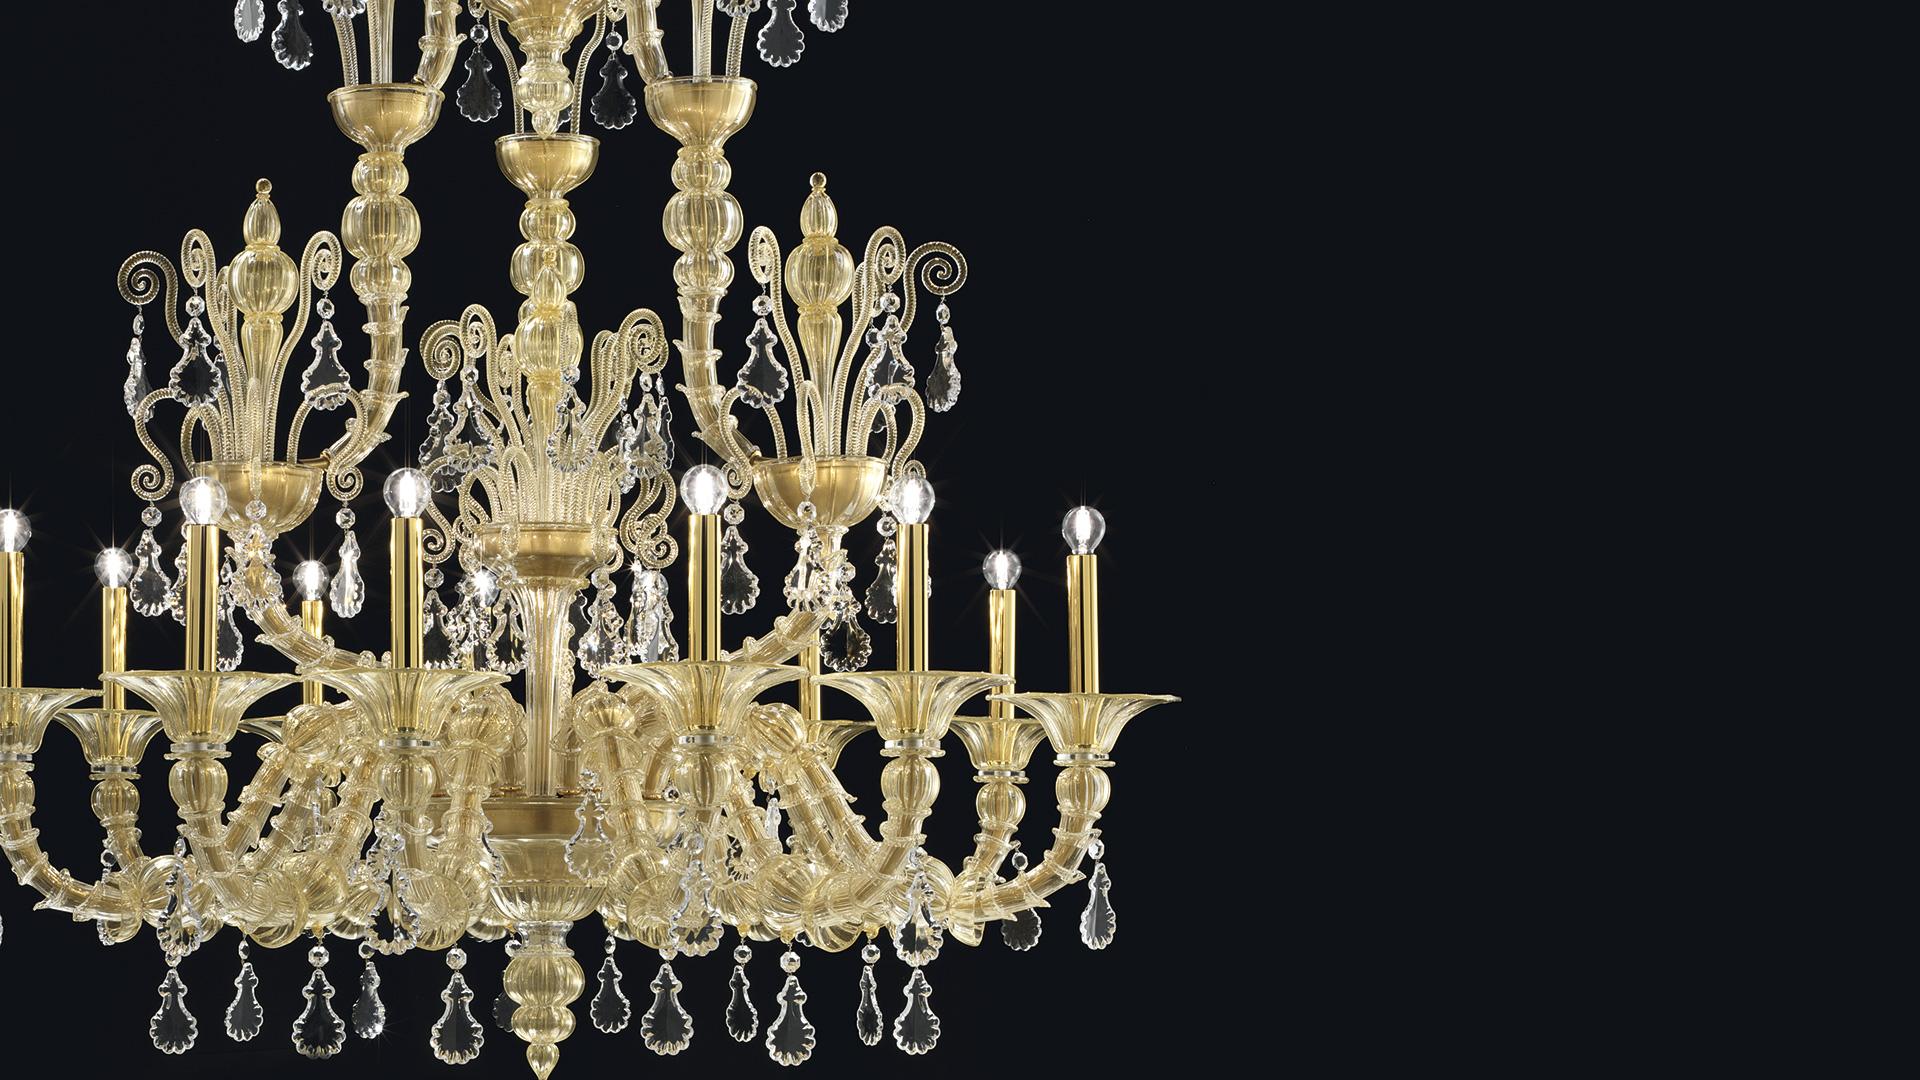 Taif was originally created in 1980 for the home of the Saudi king in the eponymous city of Taif, whence comes the name. Angelo Barovier, who conceived the design, rethought the image of the traditional Murano chandelier, preserving the value of